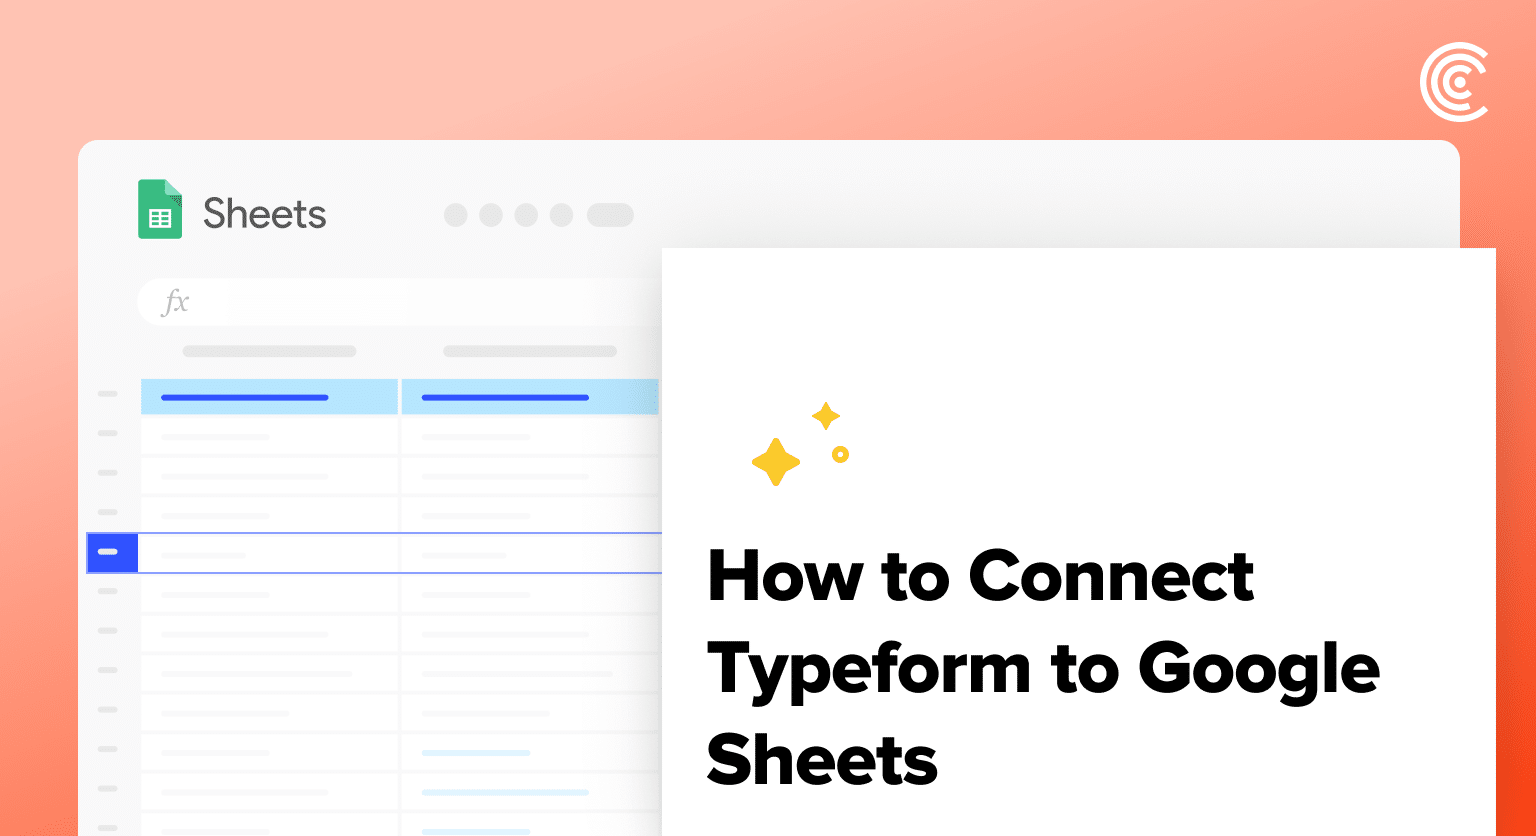 Connect Typeform to Google Sheets